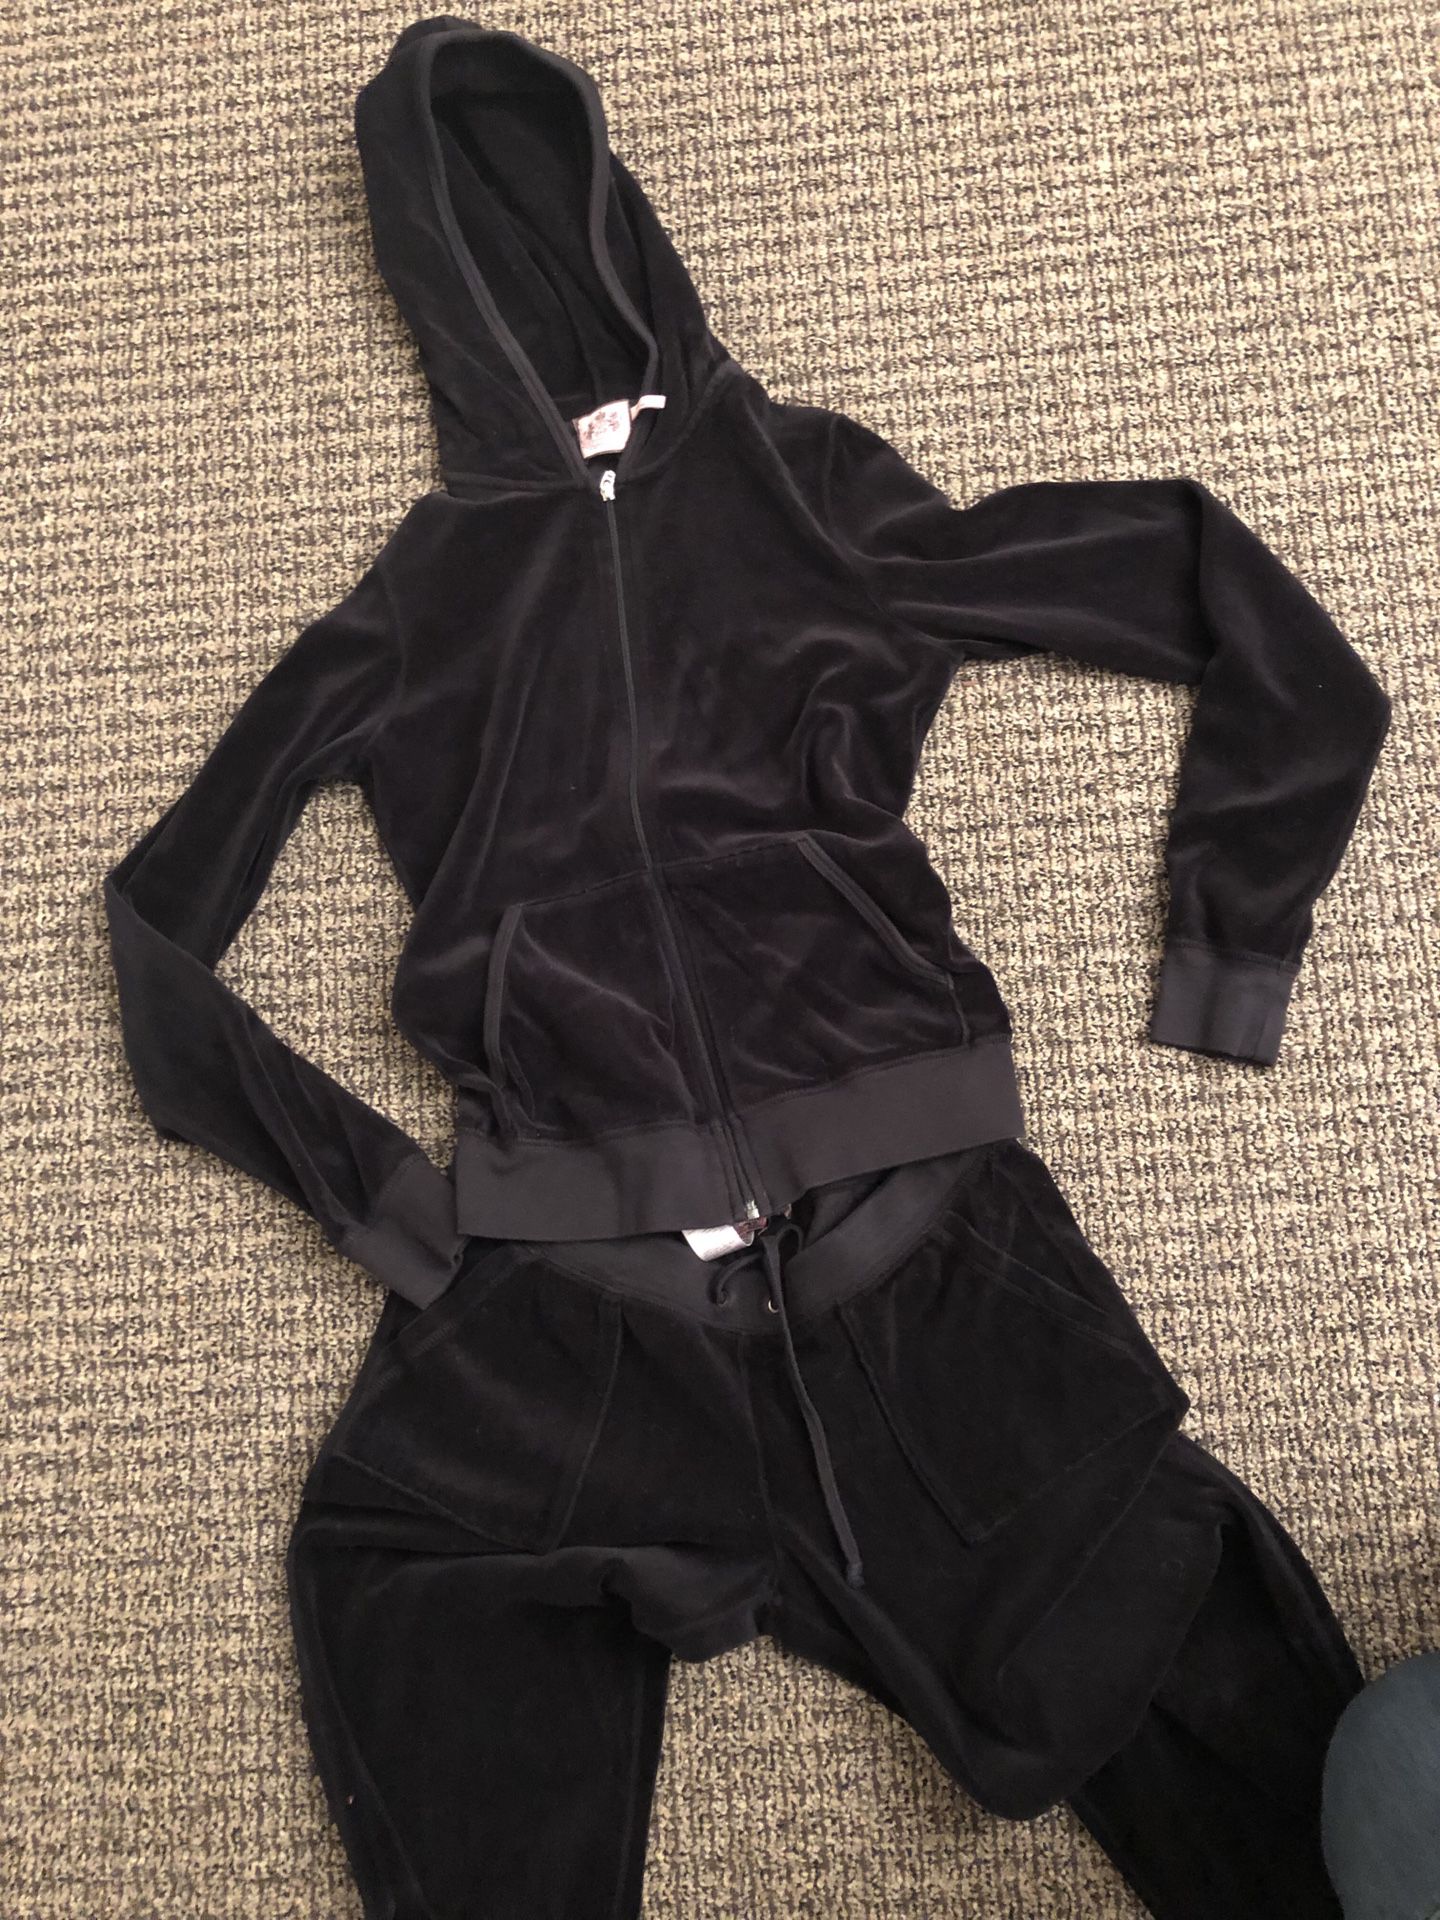 Black juicy couture tracksuit, like new, velour, top medium, bottom is medium waist short length. Women’s. Bought at Nordstrom’s. Track suit. Perfect